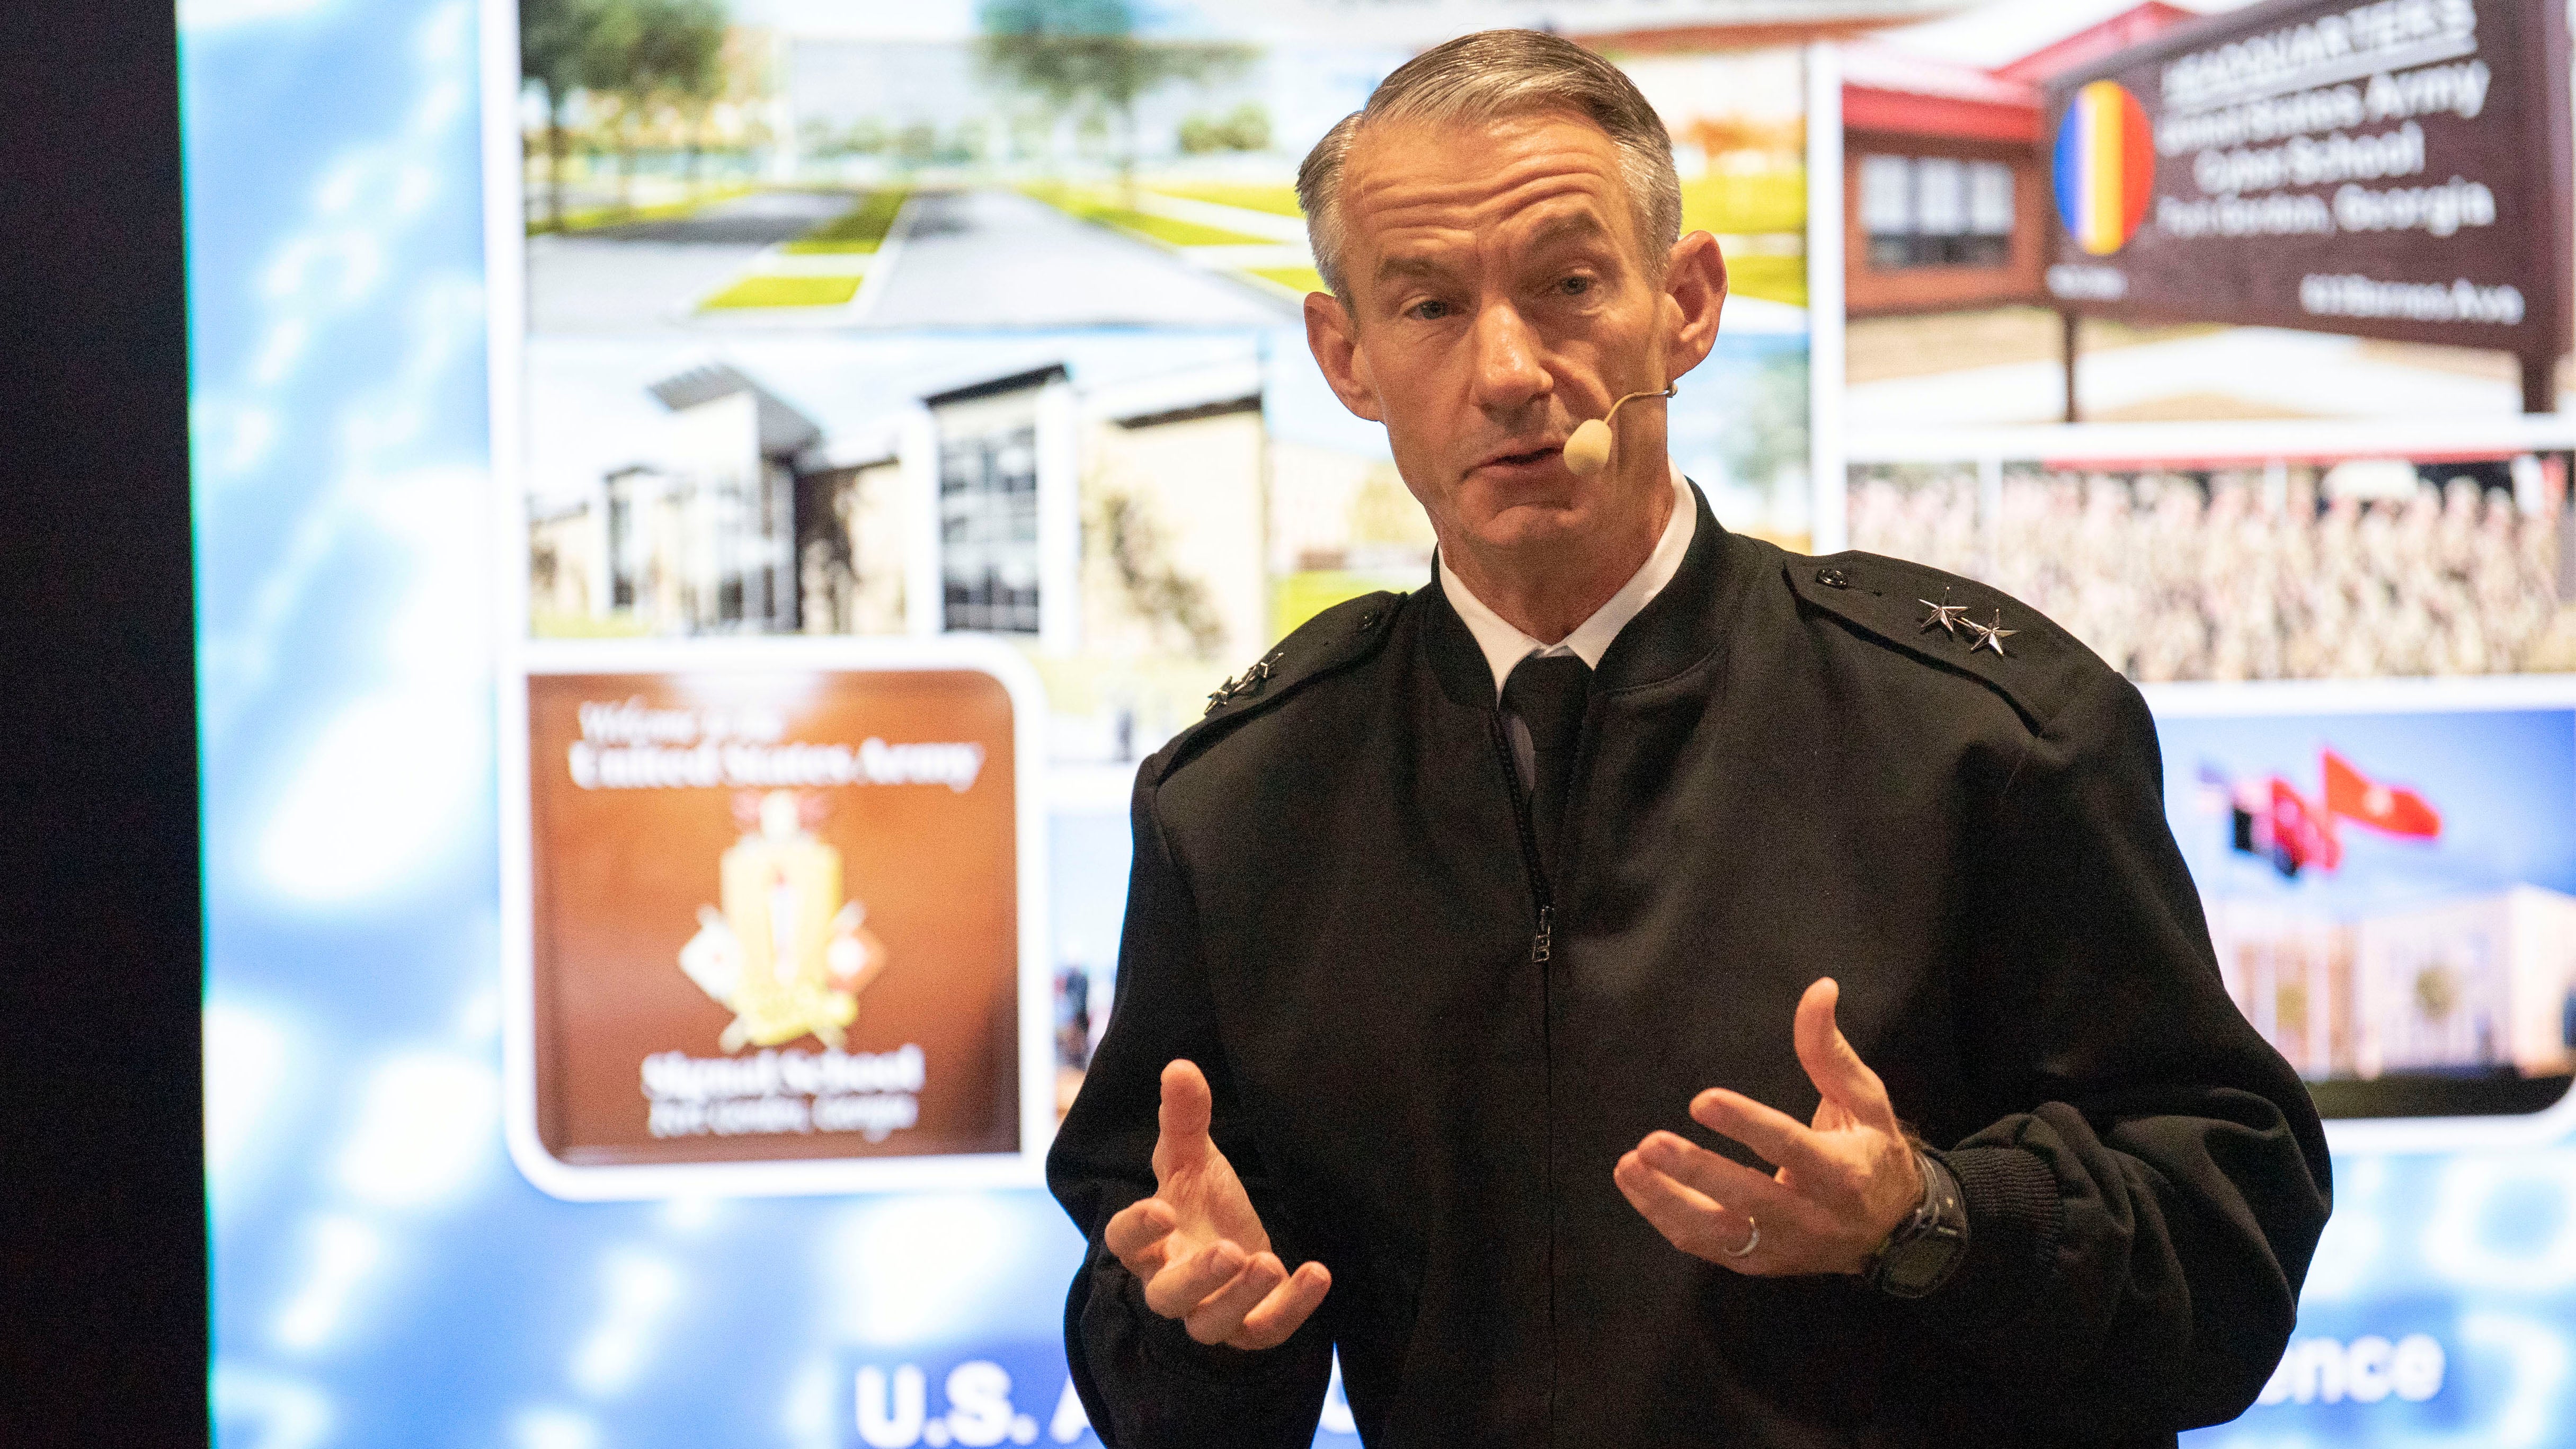 MG Neil Hersey speaks during the Cyberspace Workforce Talent Management seminar at the 2019 AUSA Annual Meeting and Exposition at the Washington Convention Center on Oct. 15, 2019.